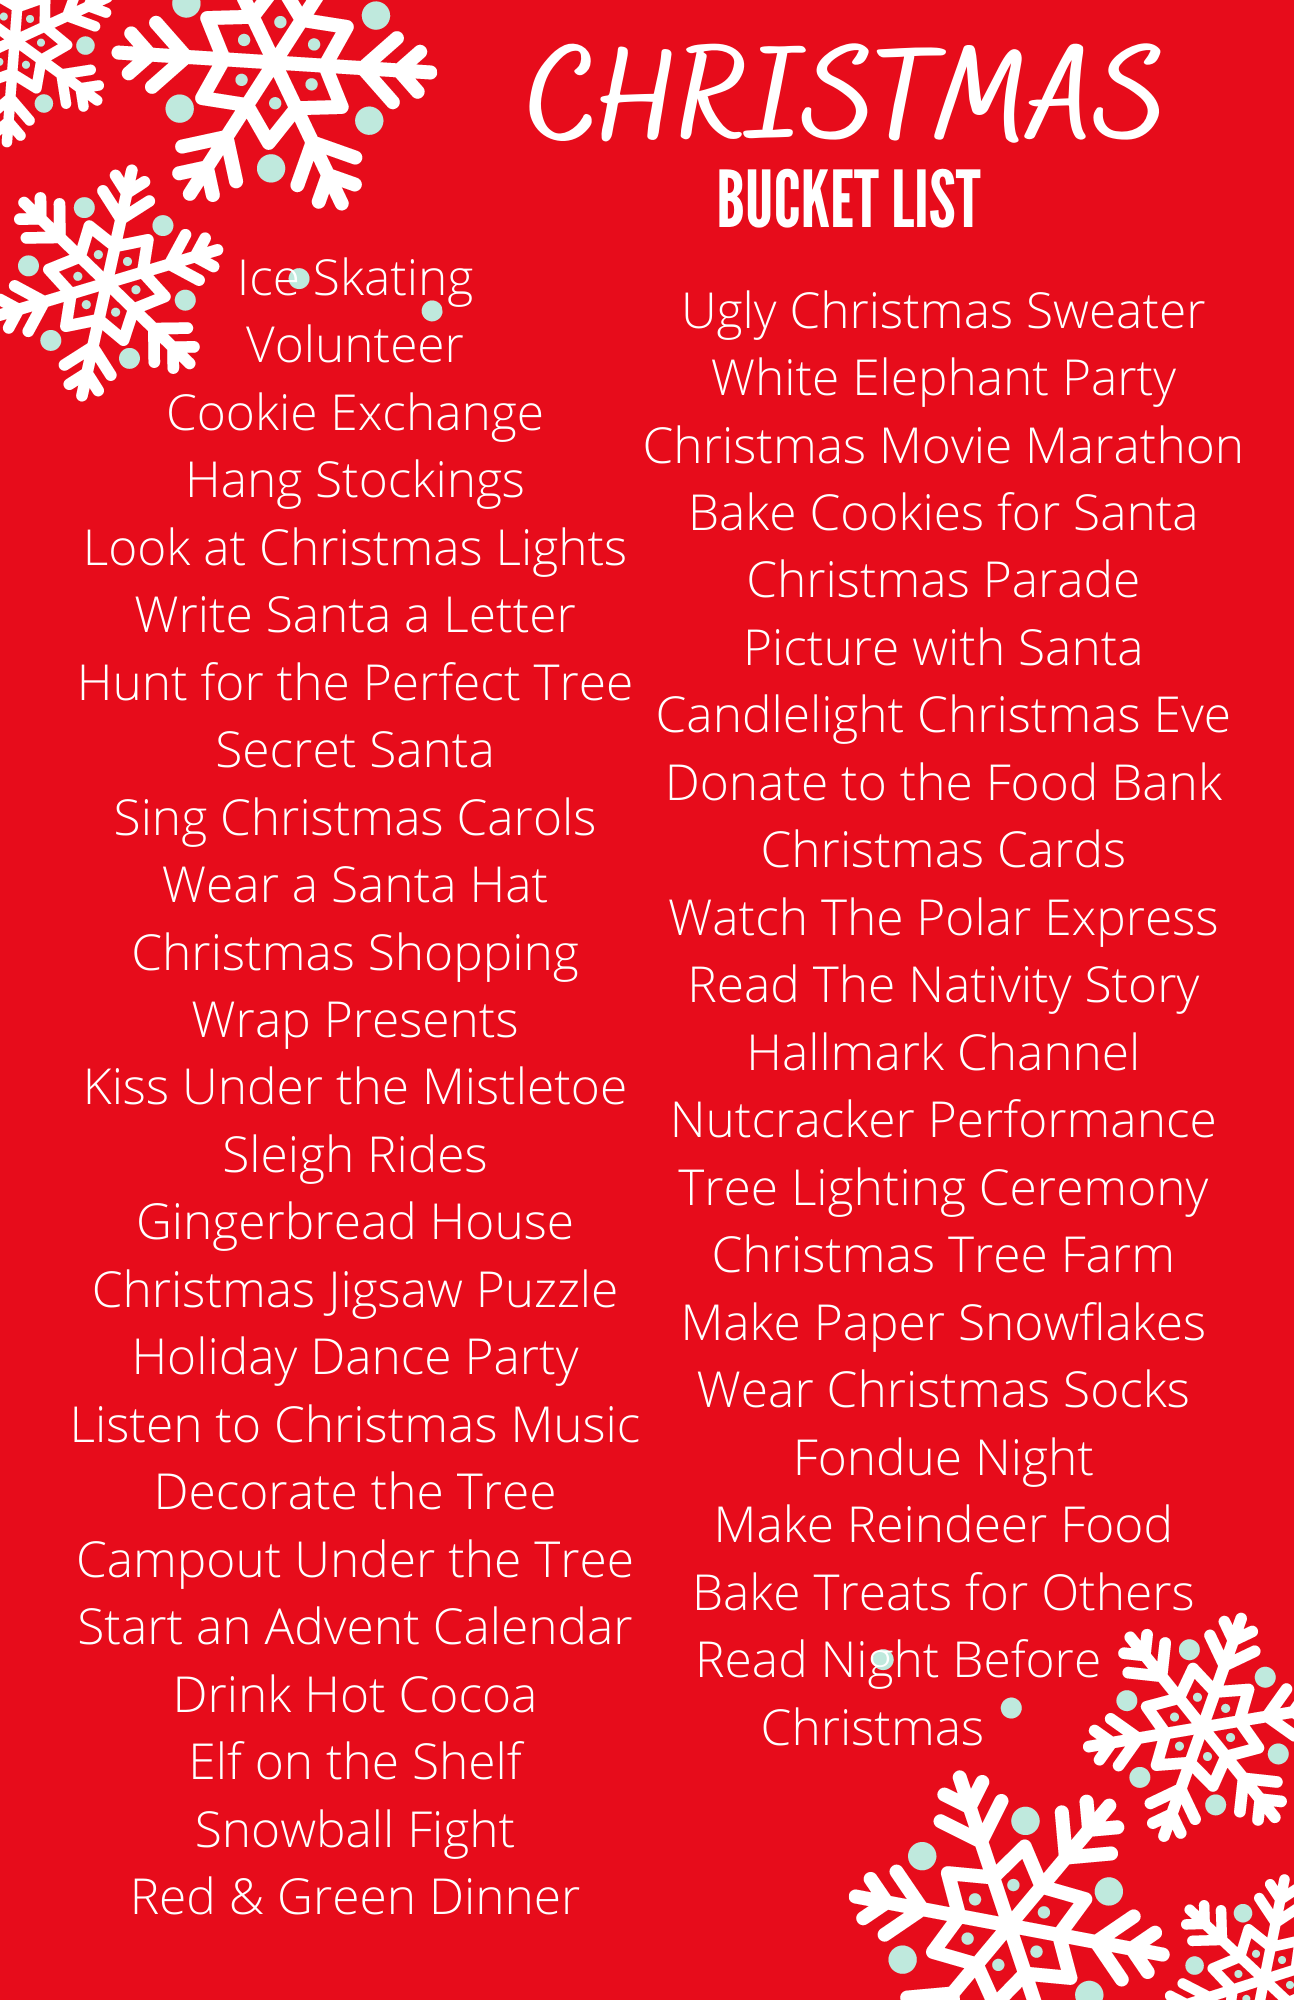 Ultimate Christmas Bucket List - Always Up For An Adventure